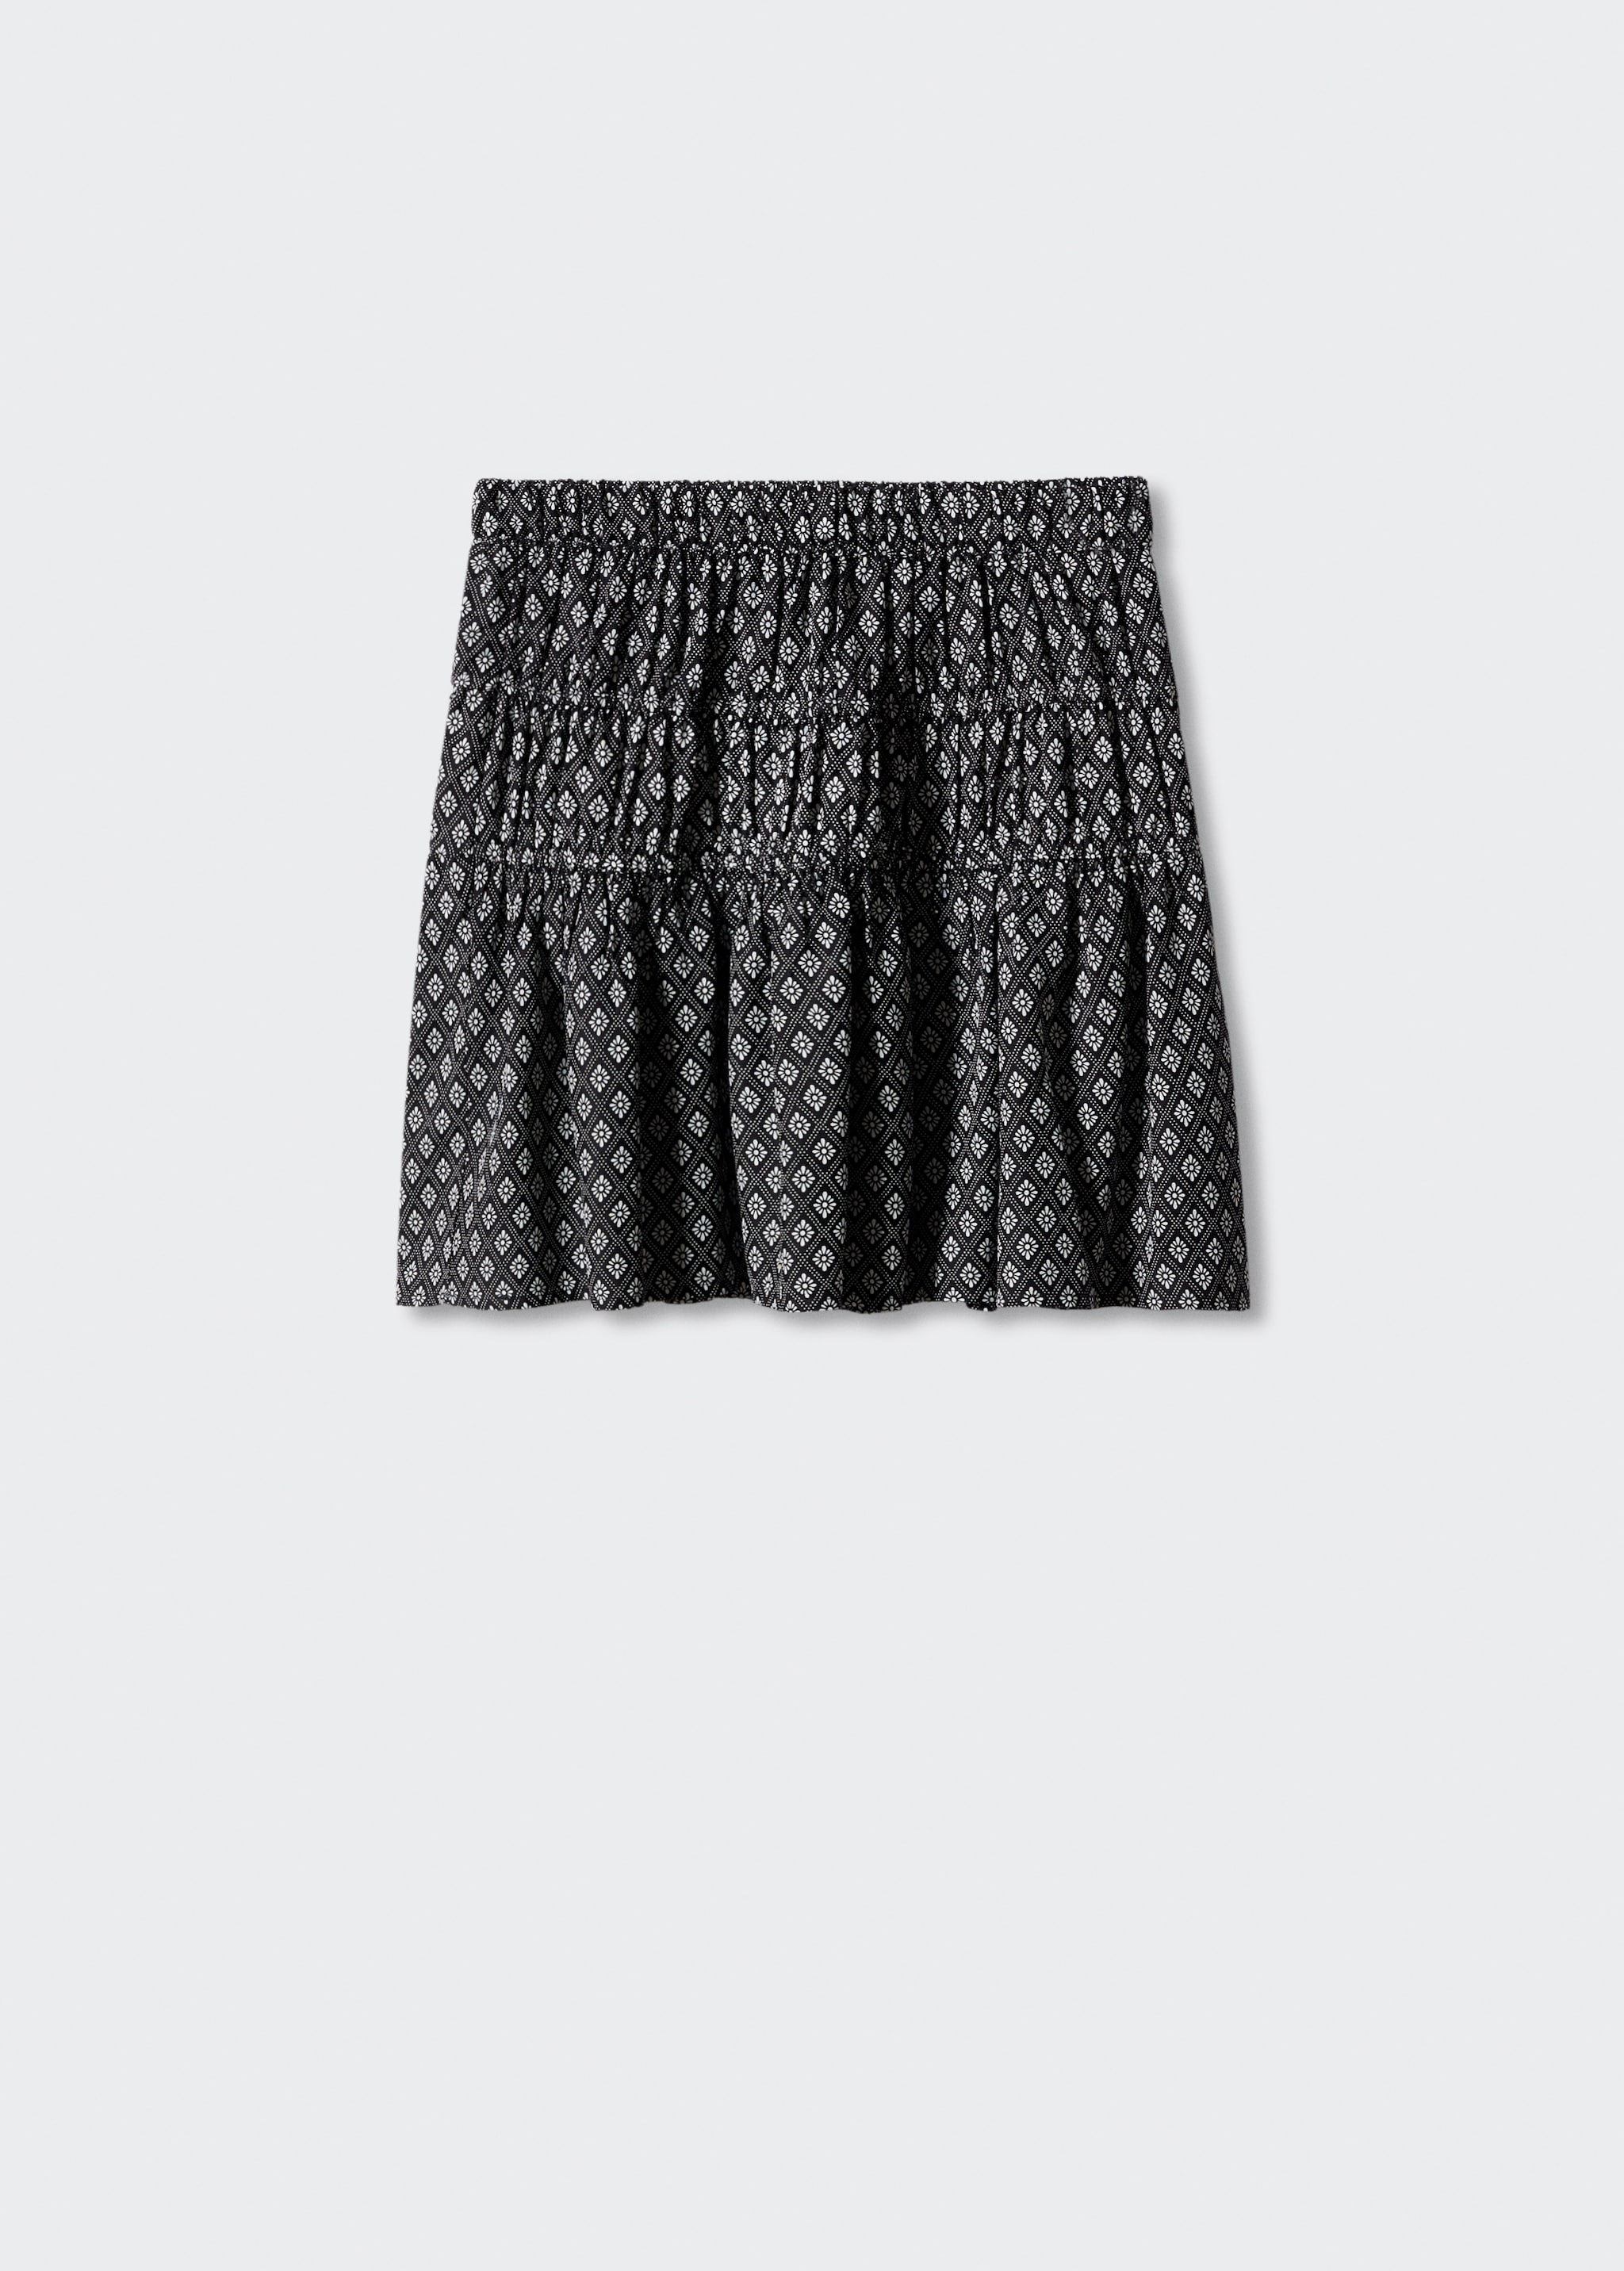 Ruffle printed skirt - Article without model